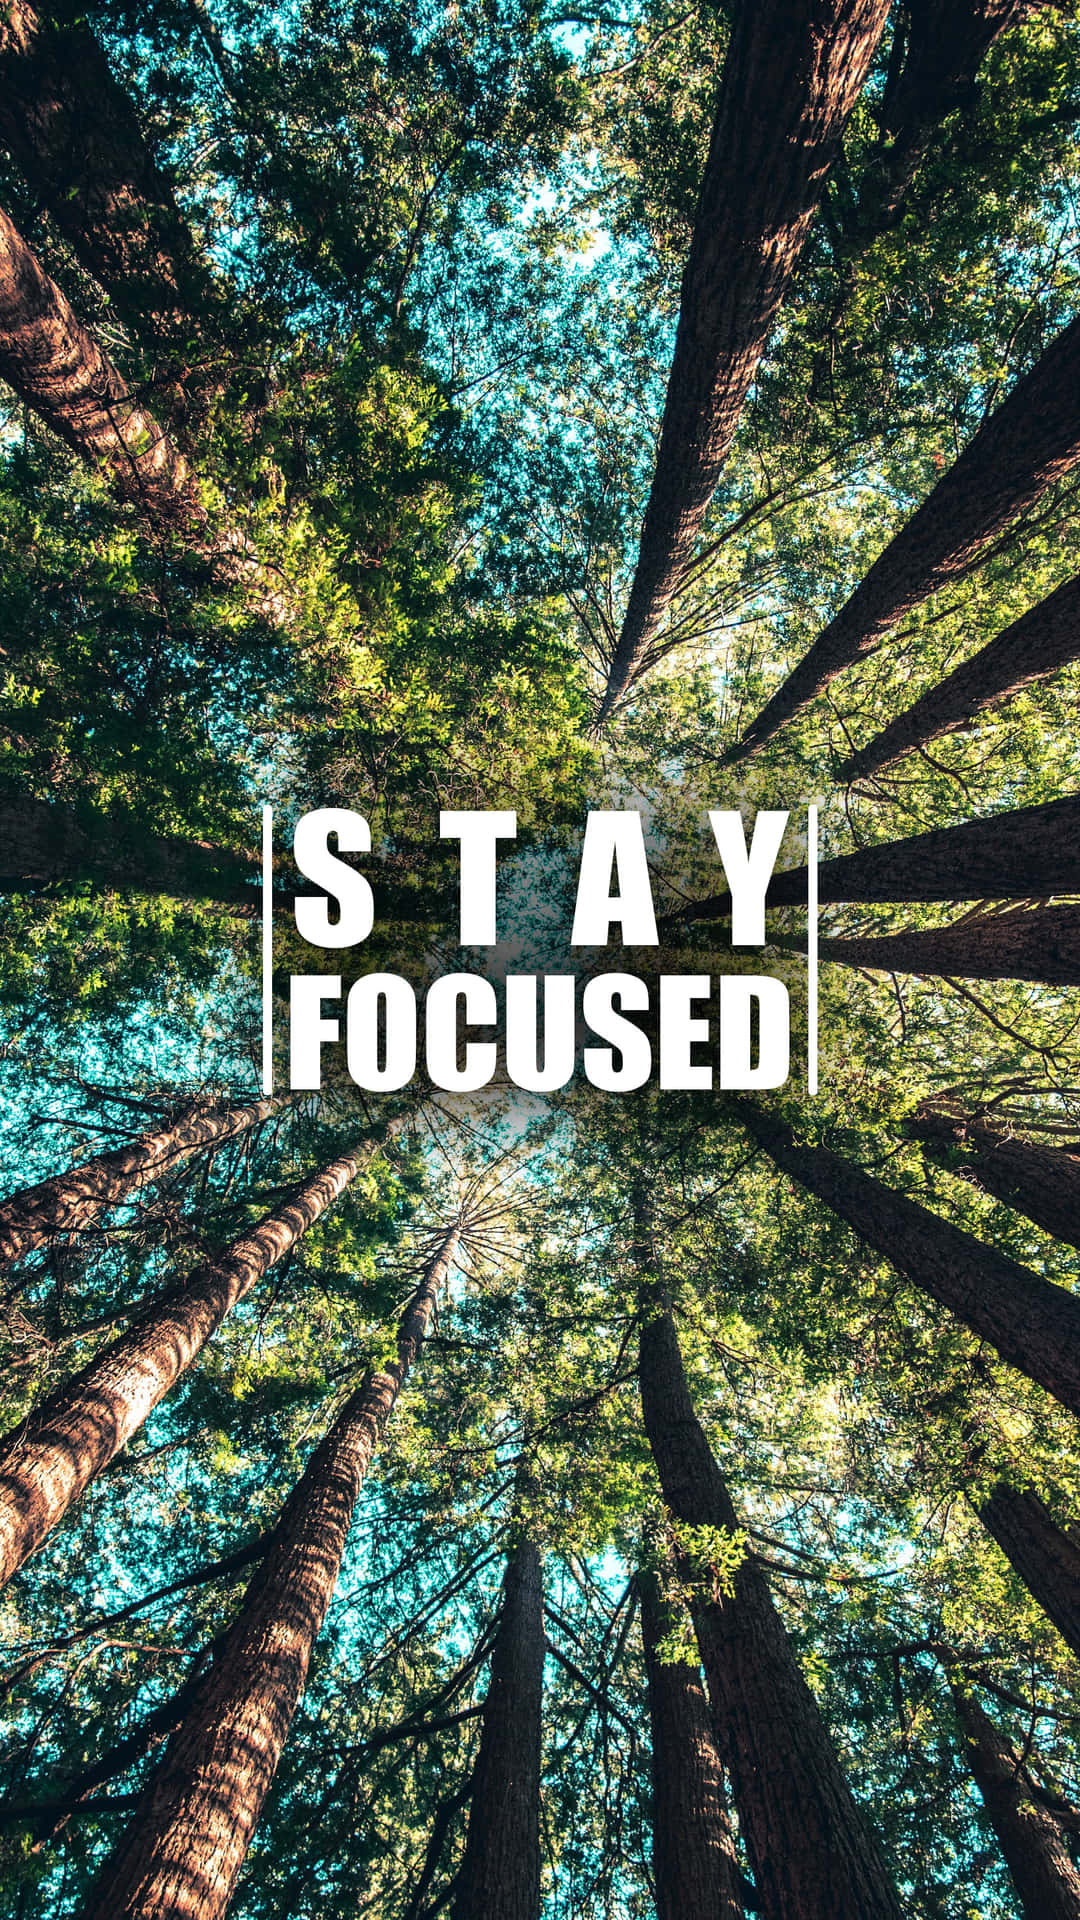 quotes about staying focused